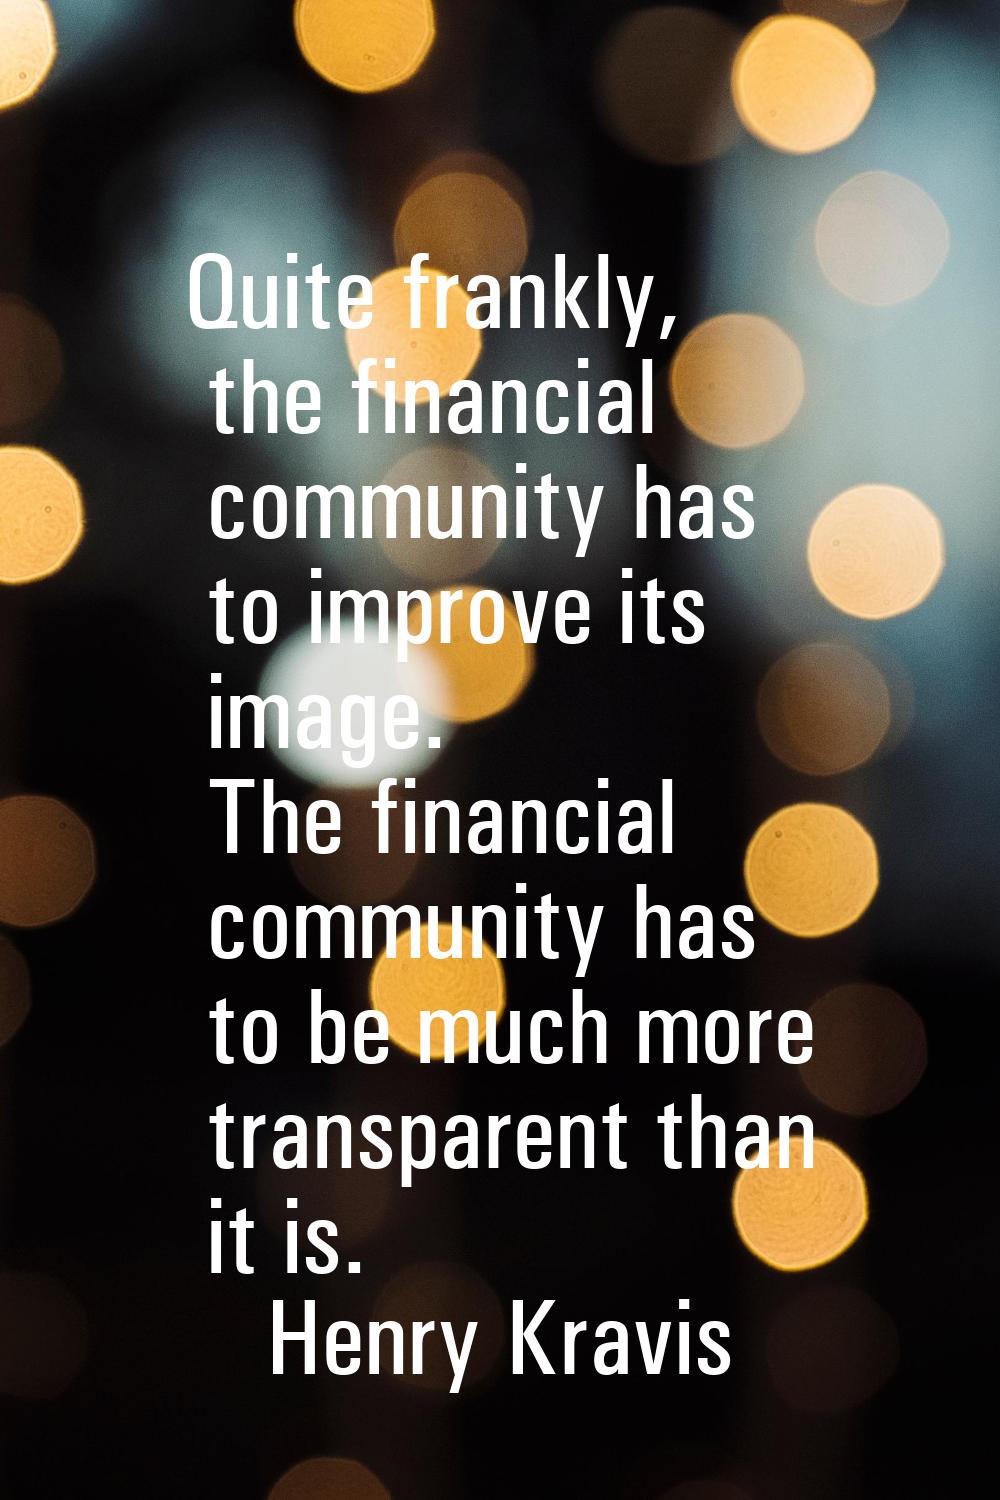 Quite frankly, the financial community has to improve its image. The financial community has to be 